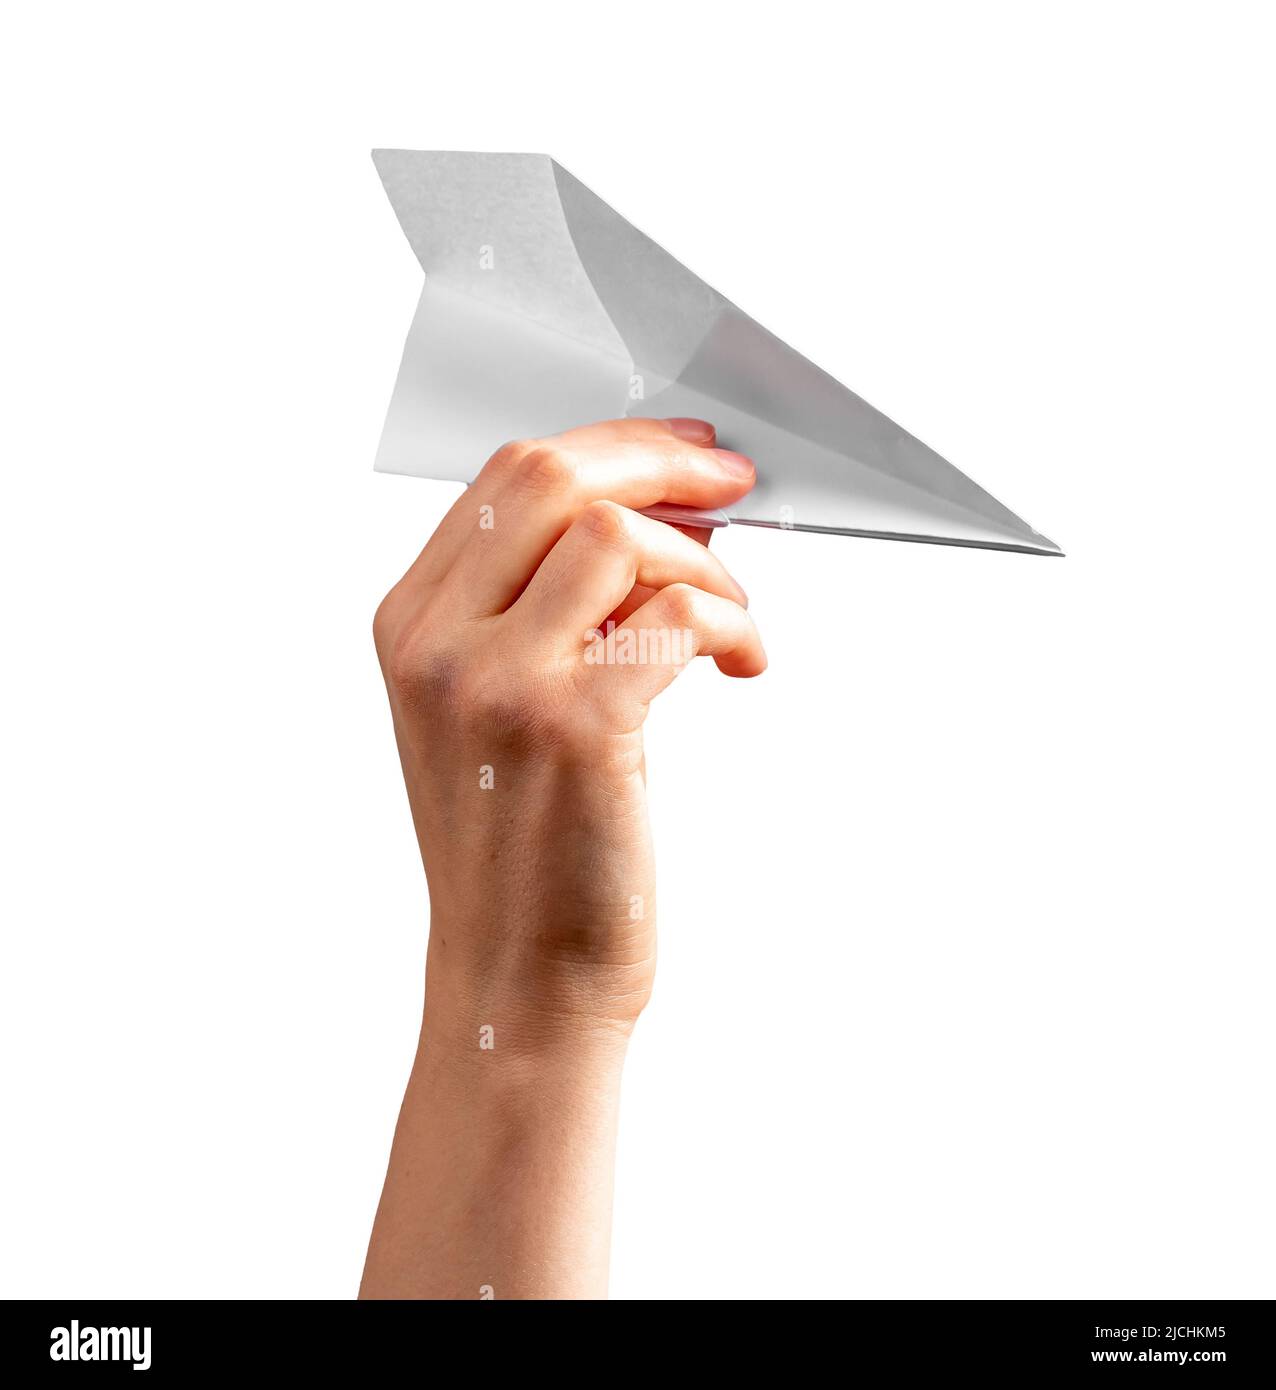 Woman hand holding origami plane isolated on white background. Paper folding art. Architecture model. High quality photo Stock Photo